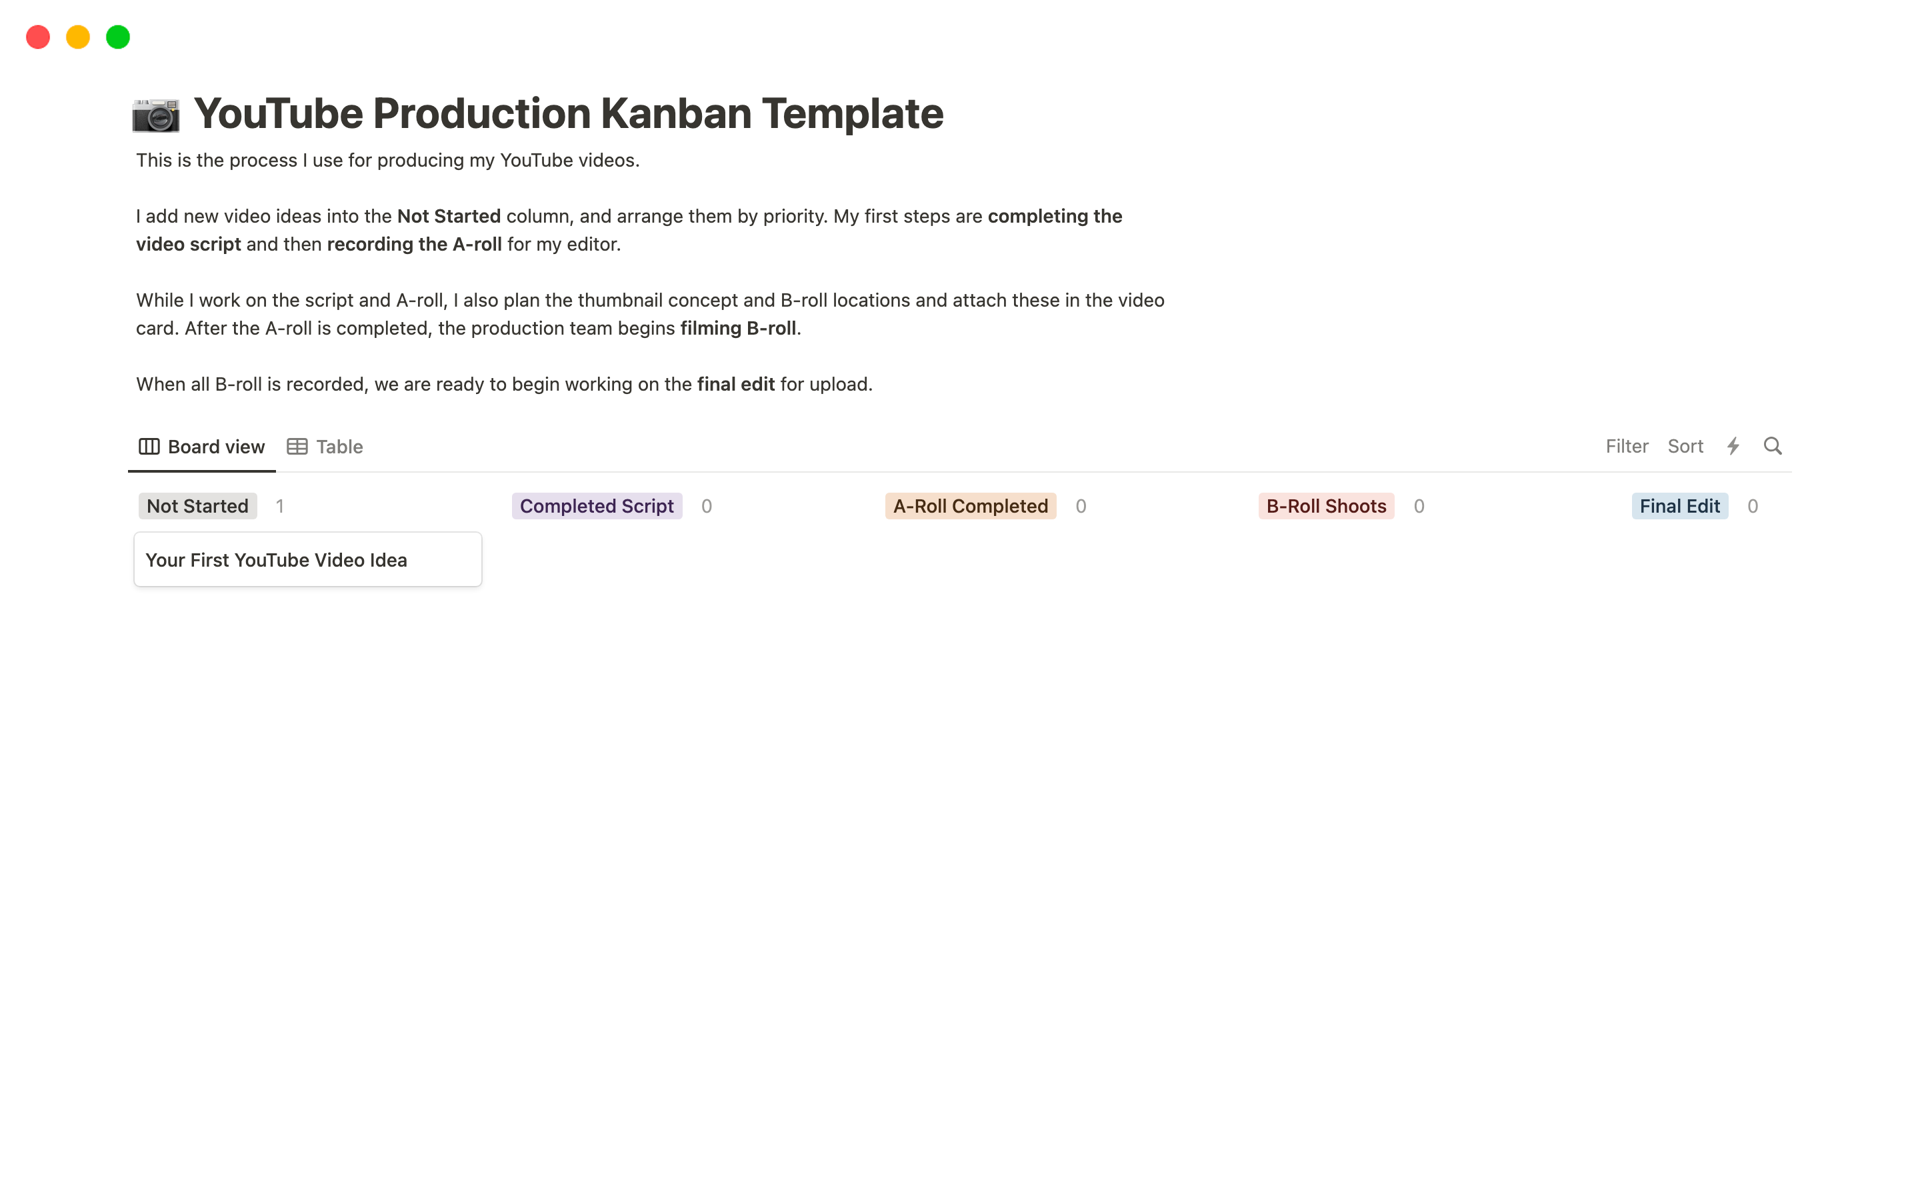 A template preview for Captain Sinbad’s YouTube Production Kanban